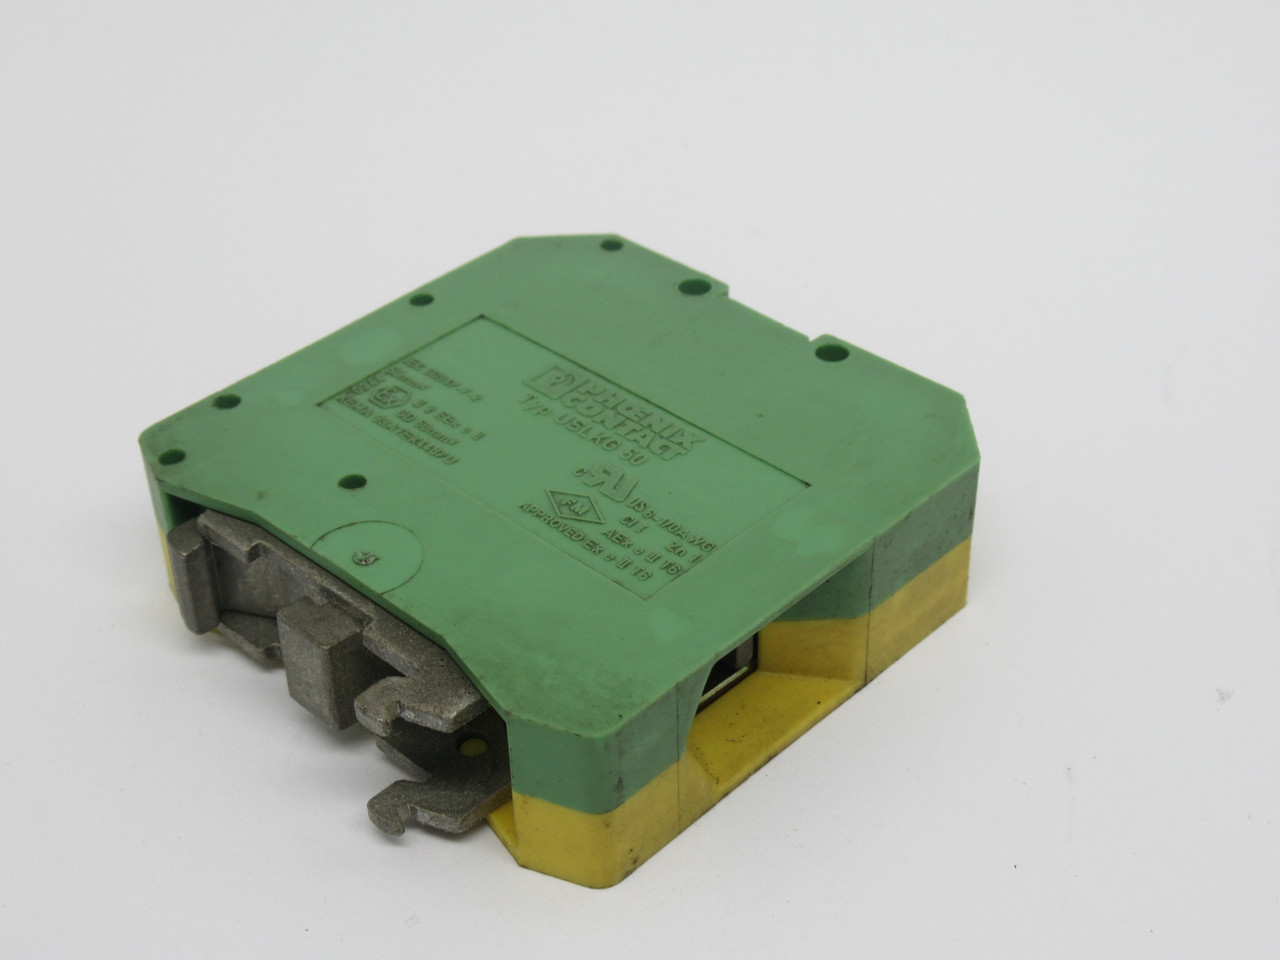 Phoenix Contact USLKG50 Ground Terminal 50mm2 Green-Yellow USED